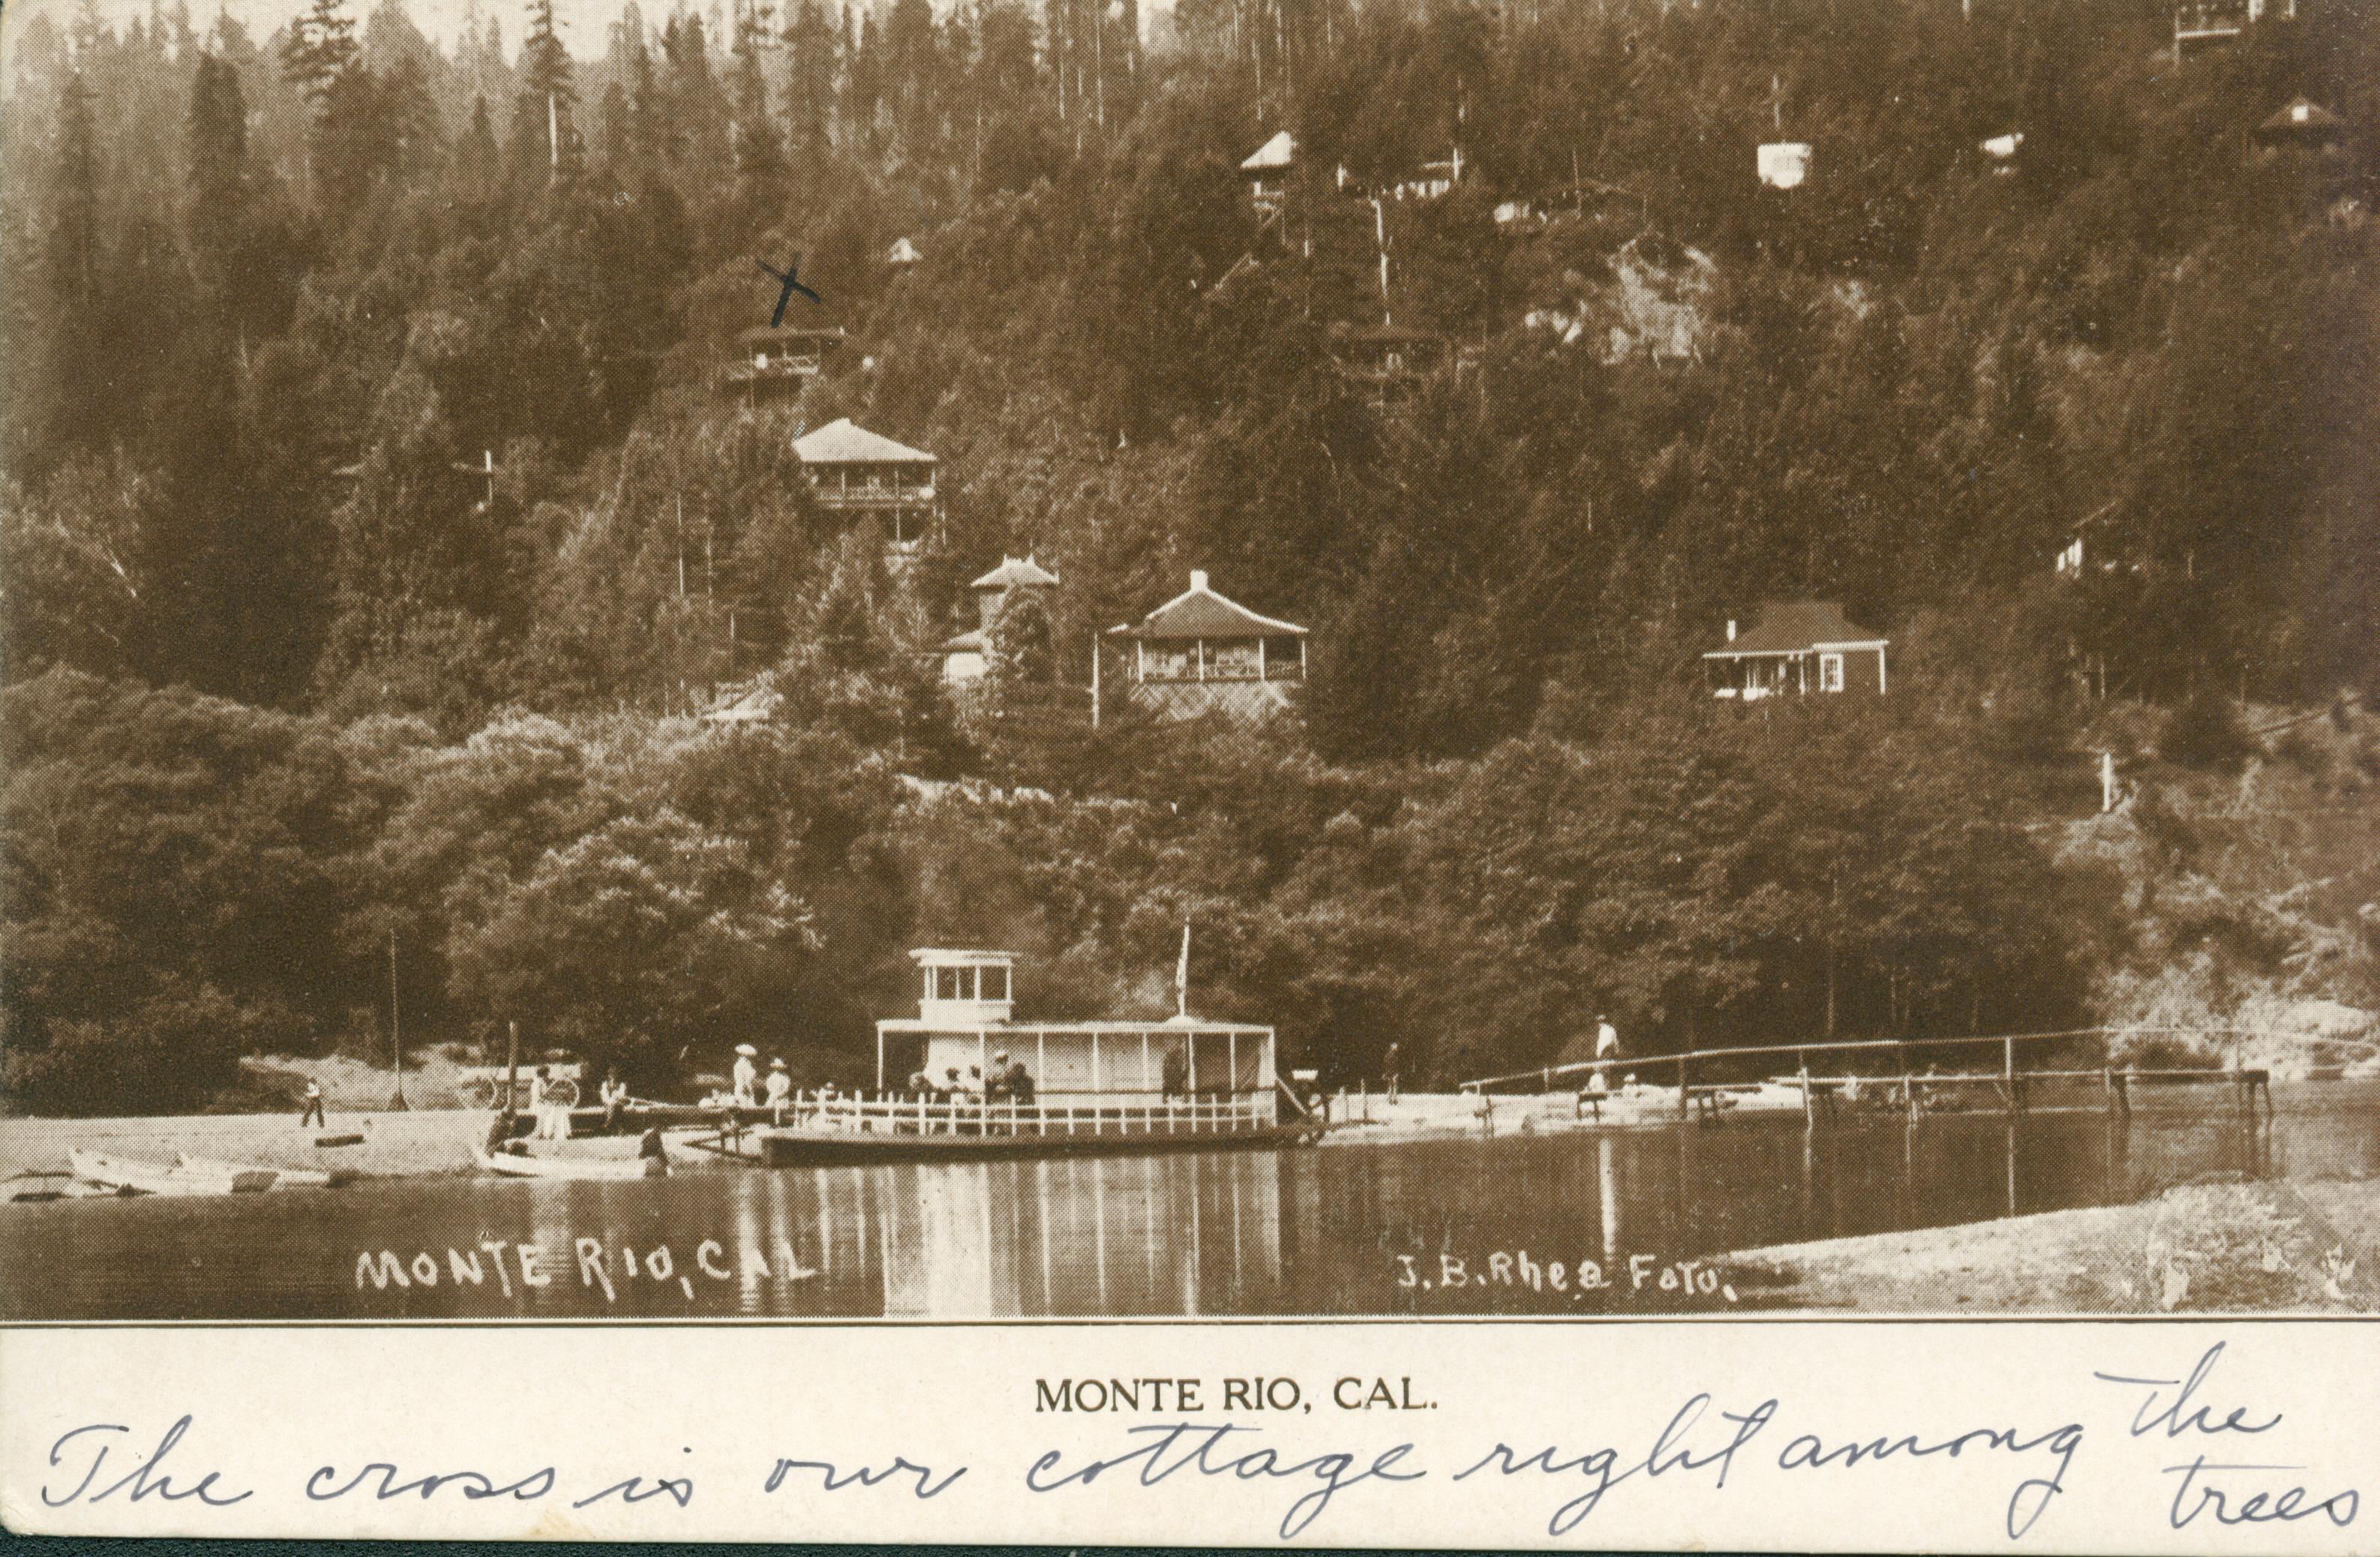 Shows the Russian river with a beach, ferry, and Monte Rio on the far side.